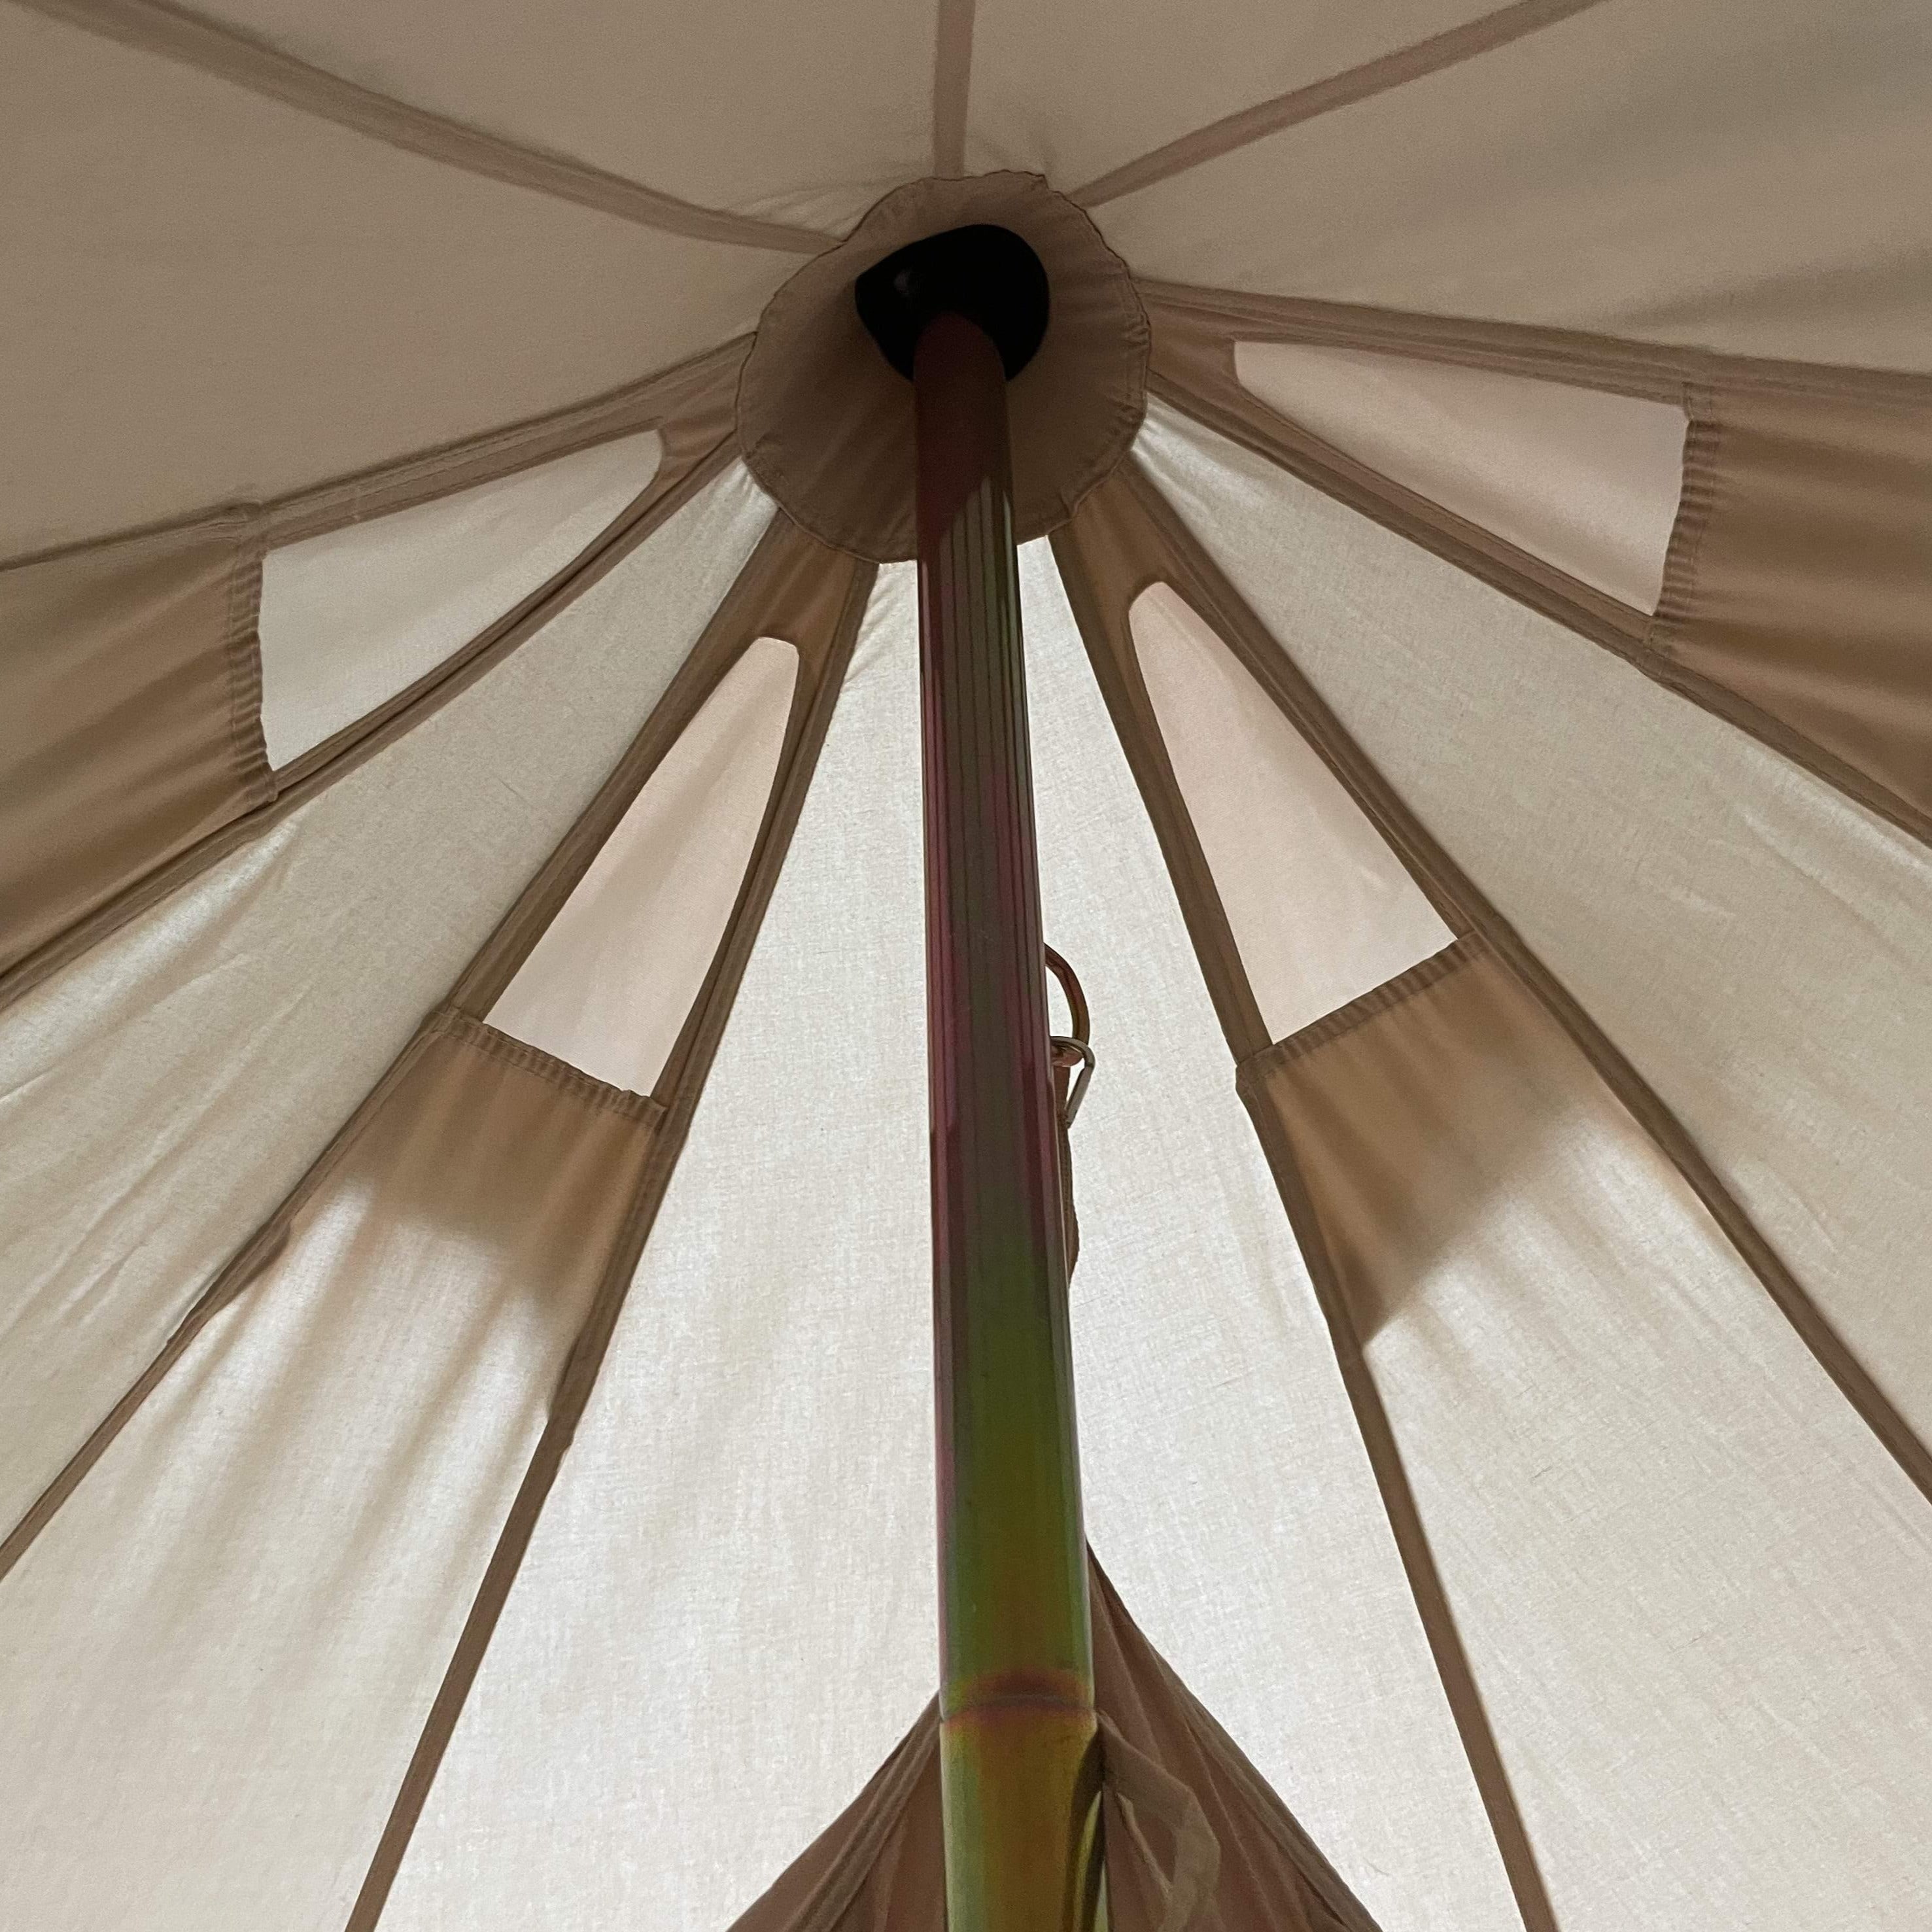 5m Bell Tent With Stove Hole &amp; Flap - Bell Tent Sussex